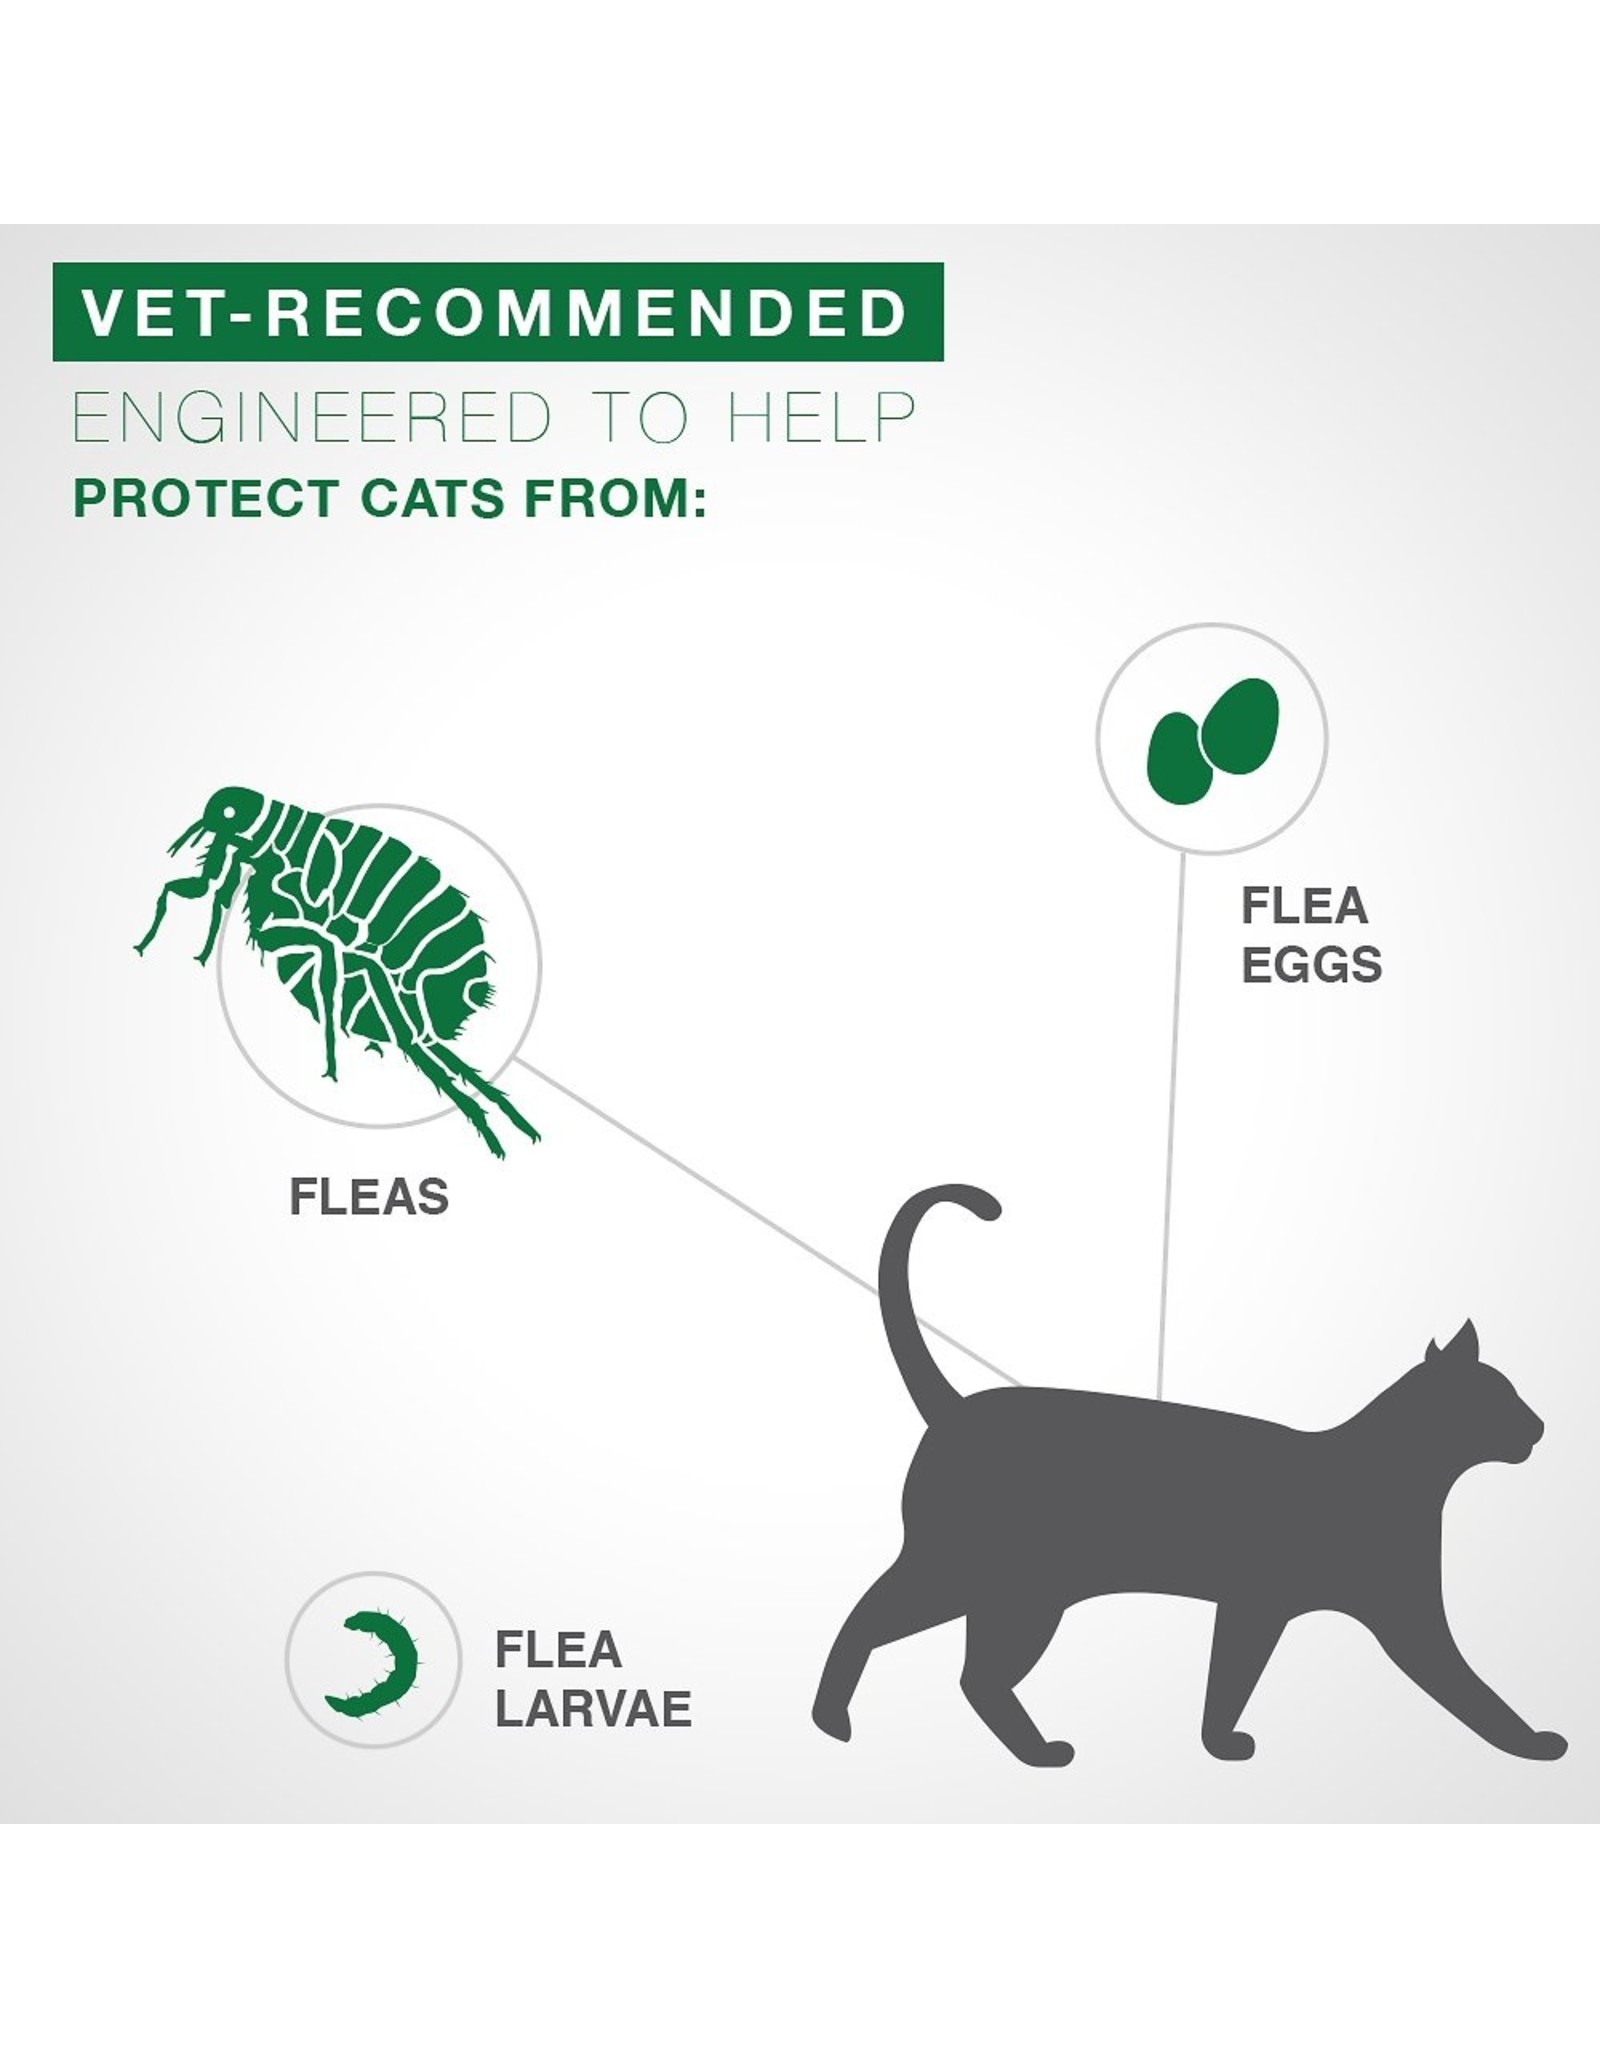 Bayer ADVANTAGE II FOR CATS FLEA & TICK TOPICAL SOLUTION